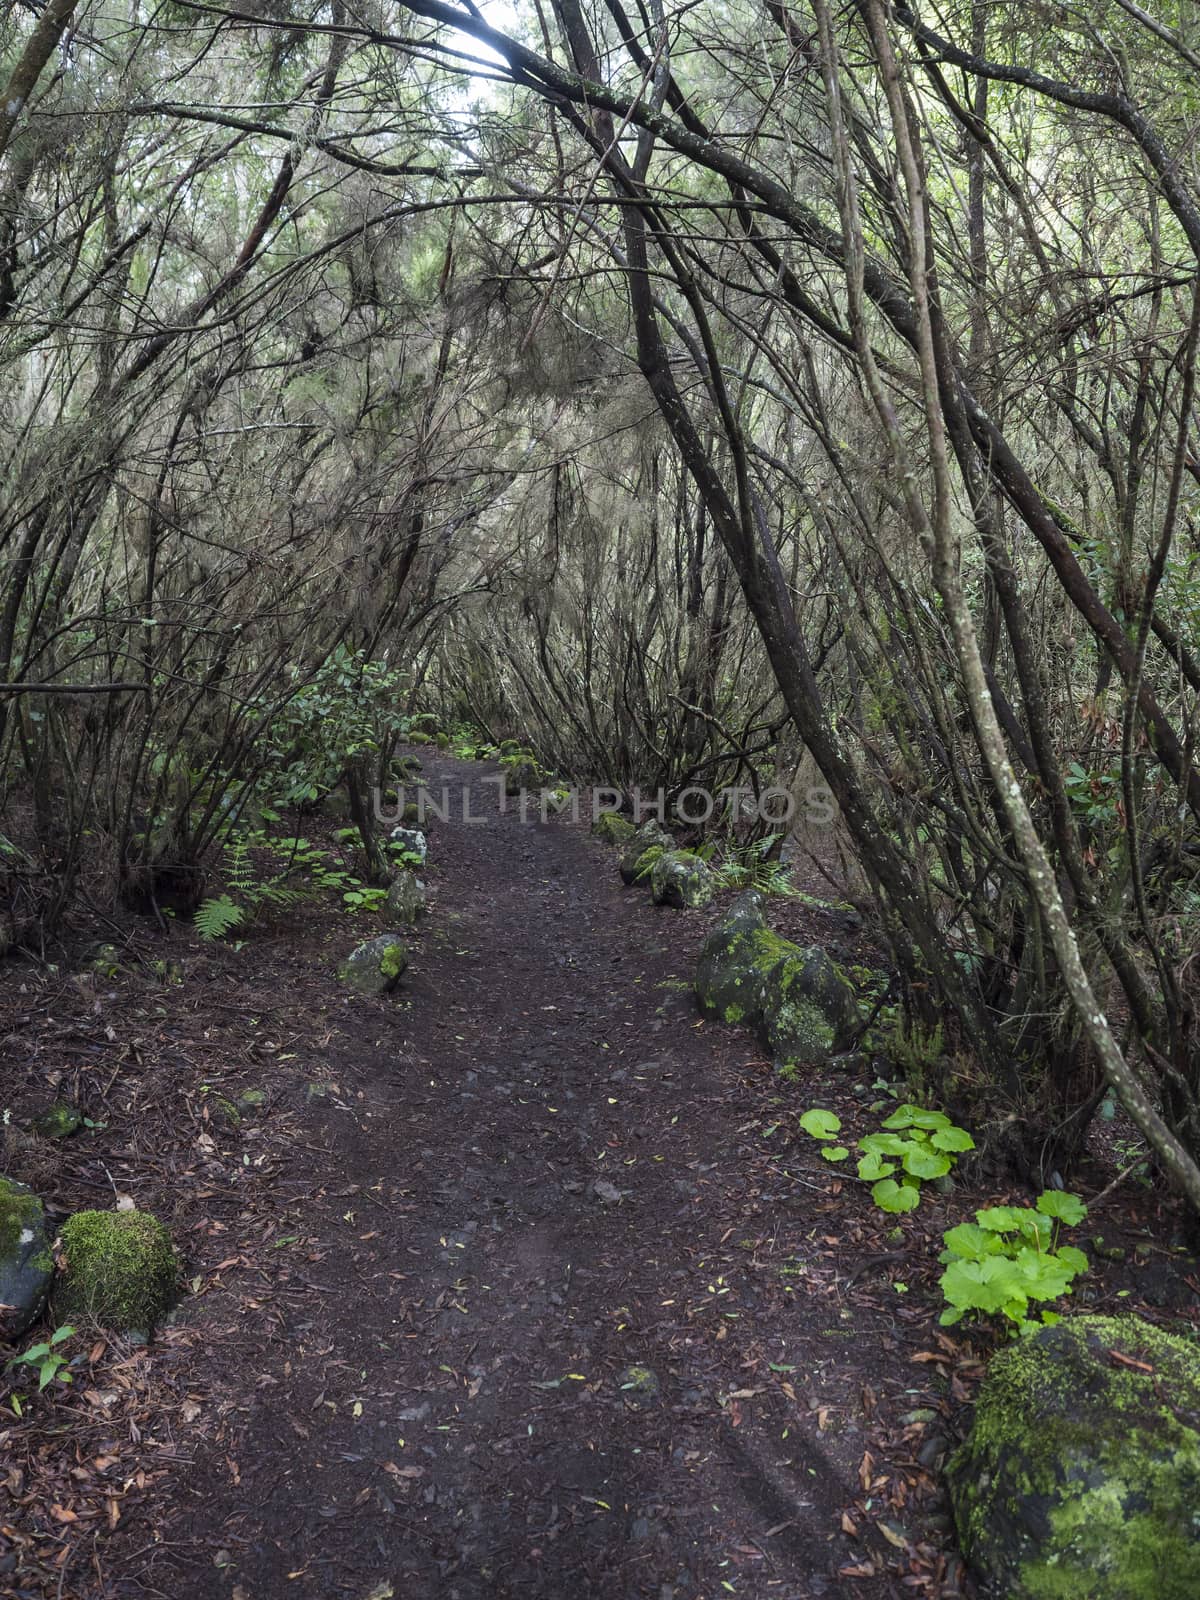 La Zarza nature park with path in beautiful mysterious Laurel forest, laurisilva in the northern part of La Palma, Canary Islands, Spain.